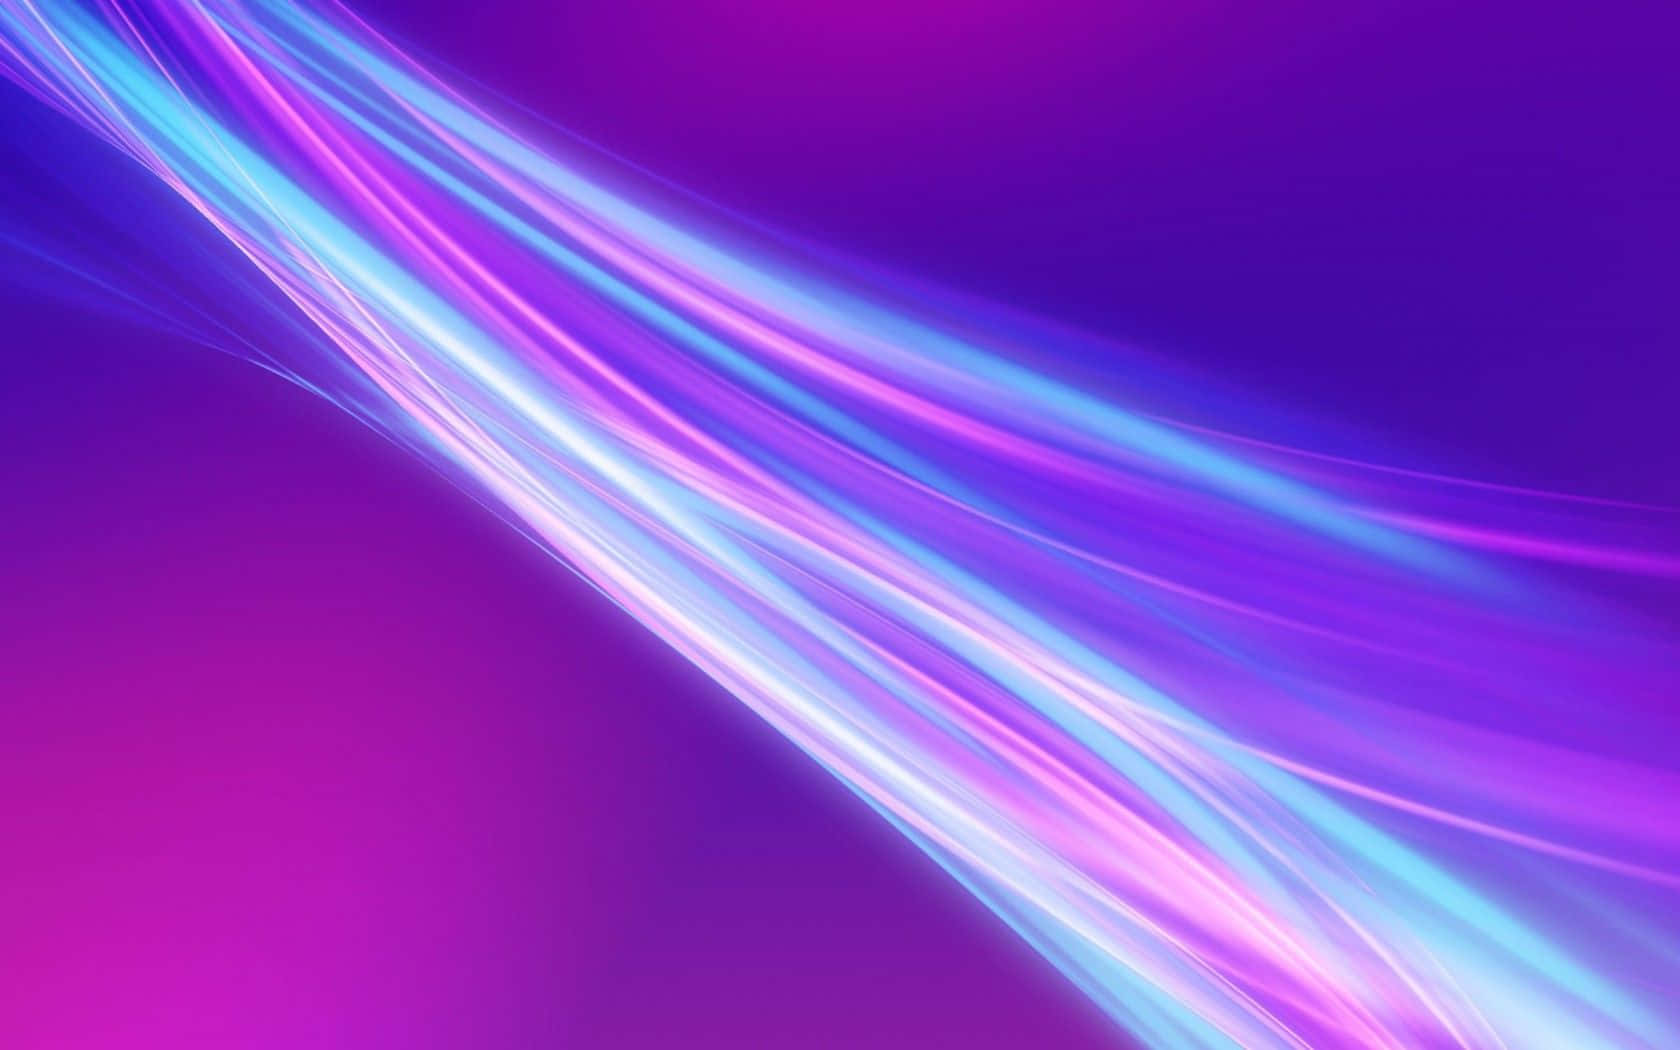 A Purple And Blue Background With A Light Streak